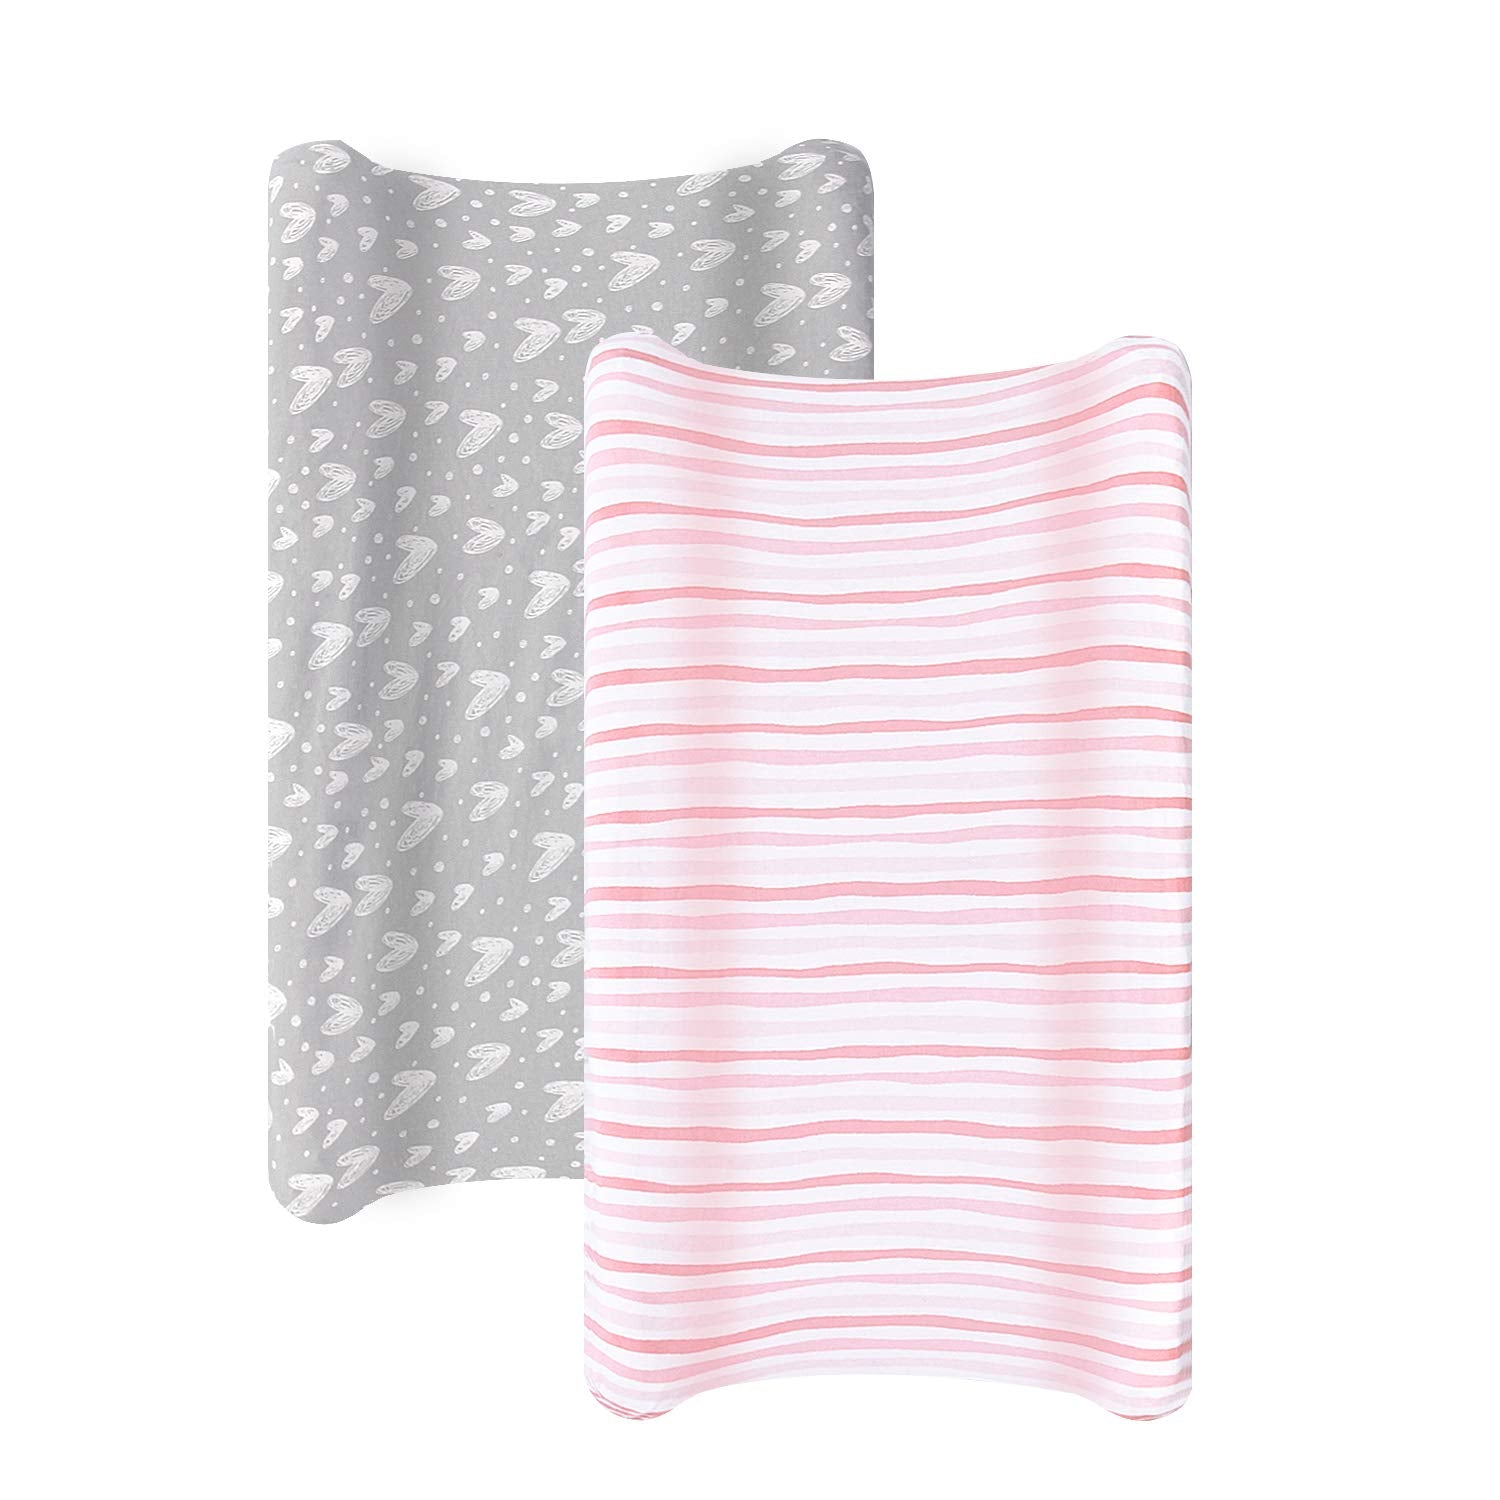 Changing Pad Cover - 2 Pack, 100% Jersey Knit Cotton,  Gray & Pink - Biloban Online Store